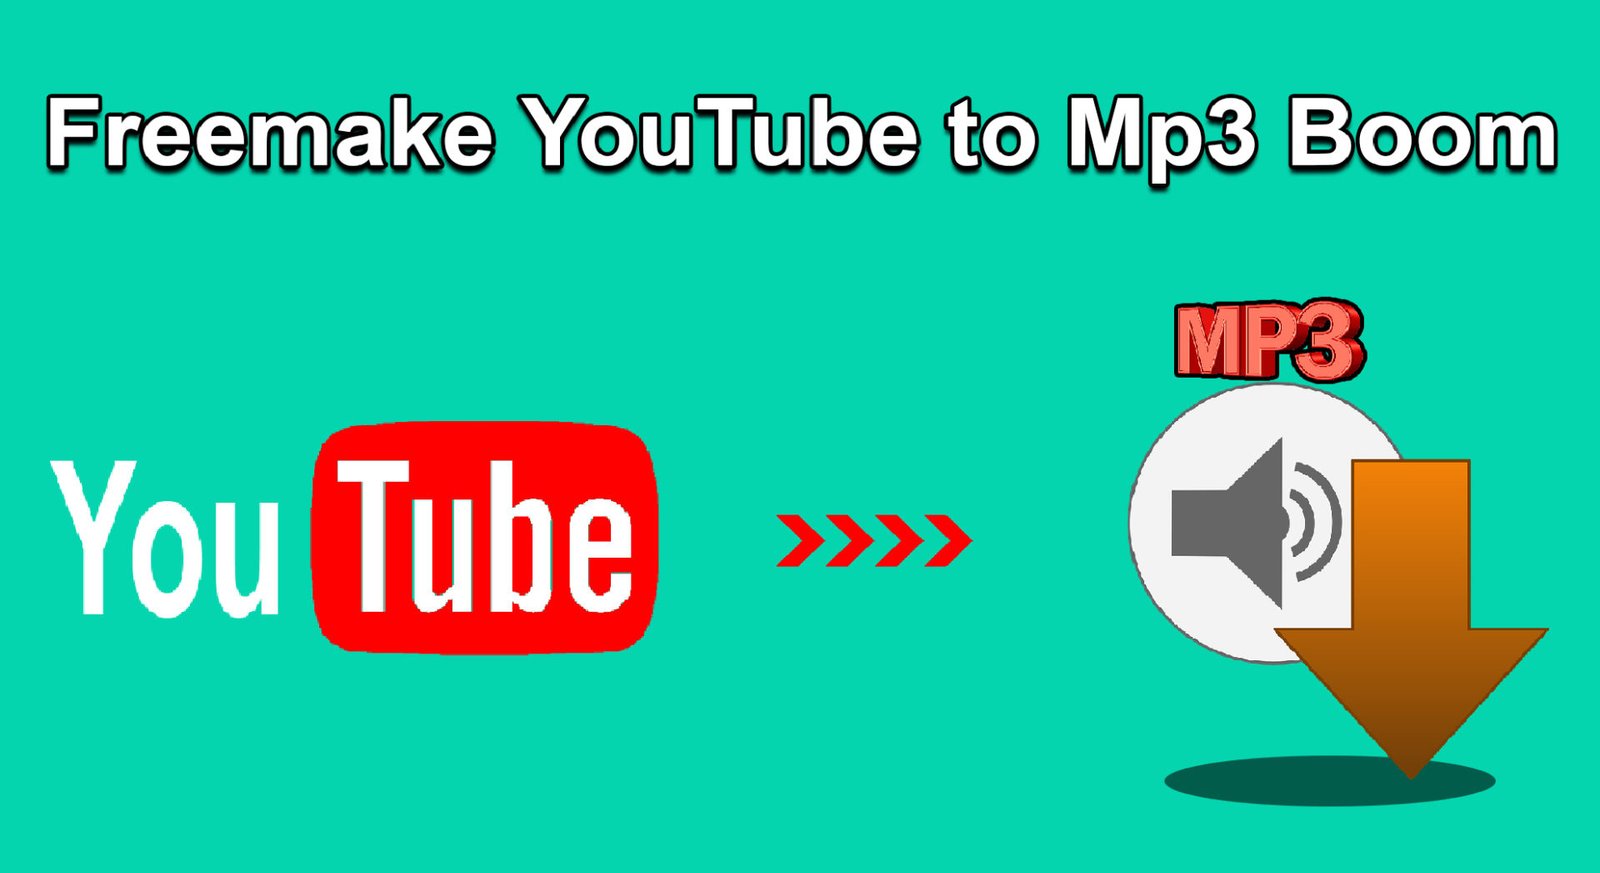 Free YouTube to MP3 Converter Premium 4.3.96.714 instal the new